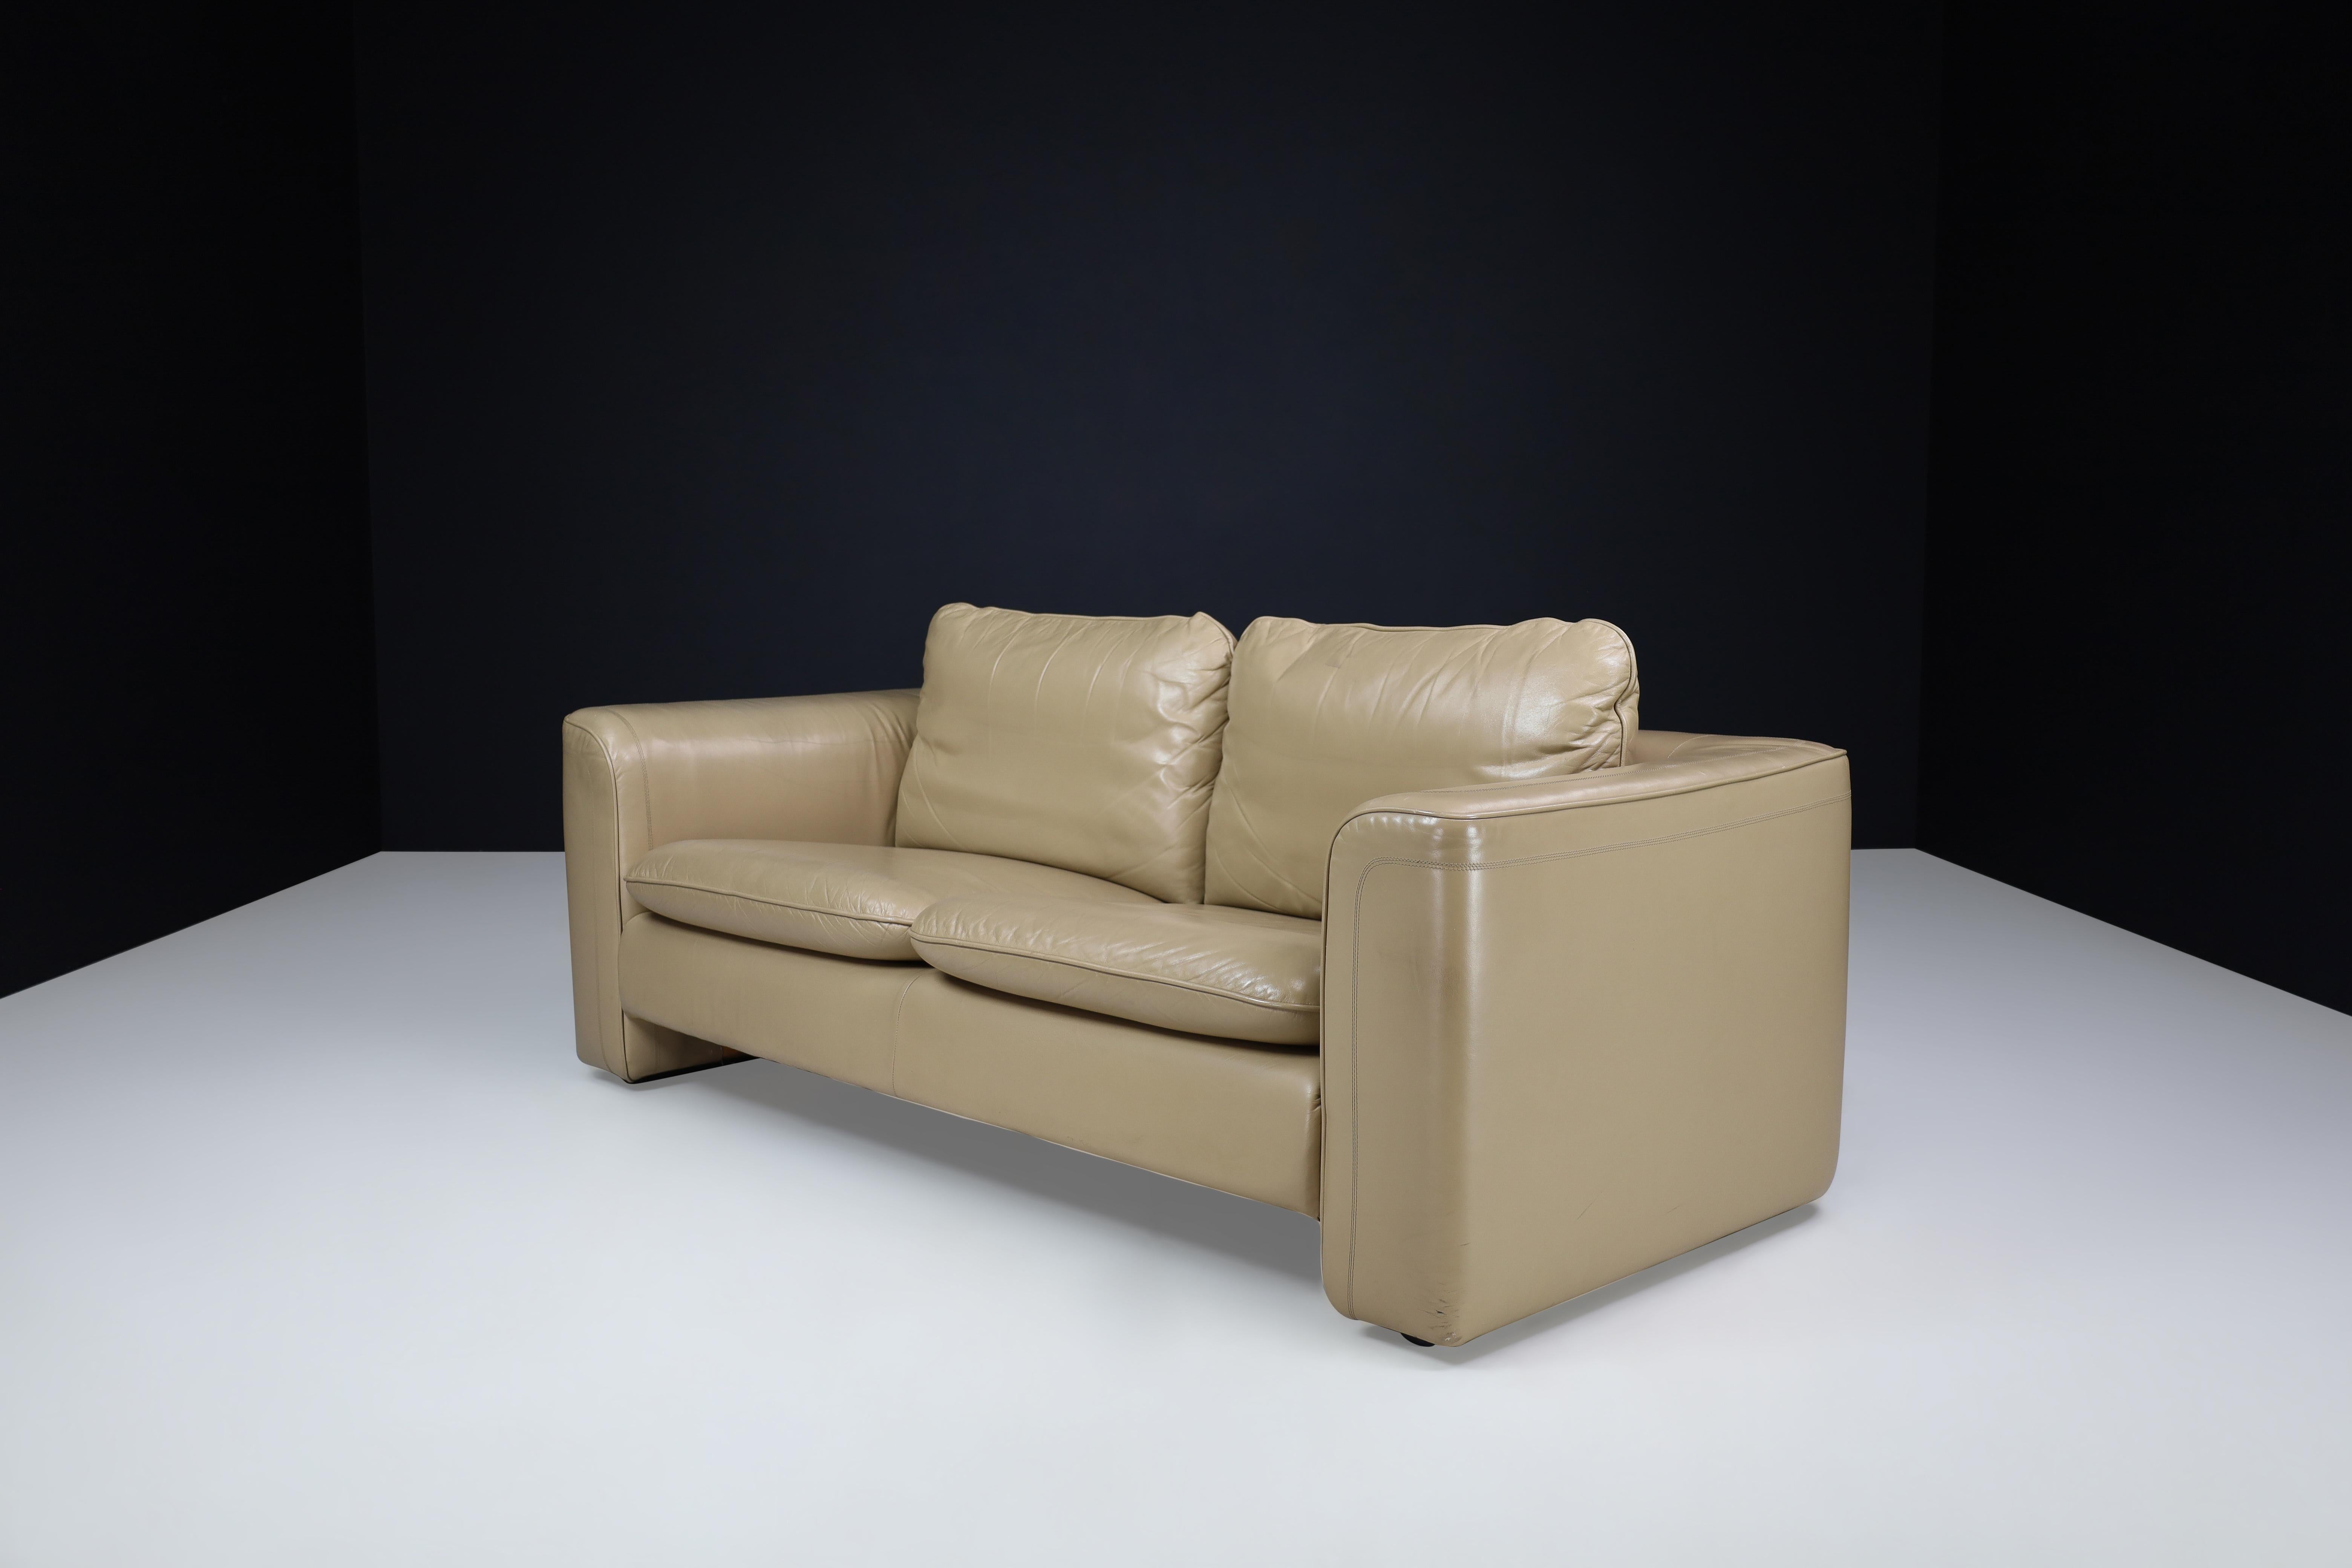 De Sede DS 98 Leather two-seater sofa, Switzerland 1980.

This two-seater De Sede DS 98 leather sofa was made in Switzerland during the 1980s and is a symbol of superb comfort and top-quality craftsmanship. Its sturdy wooden structure and thick